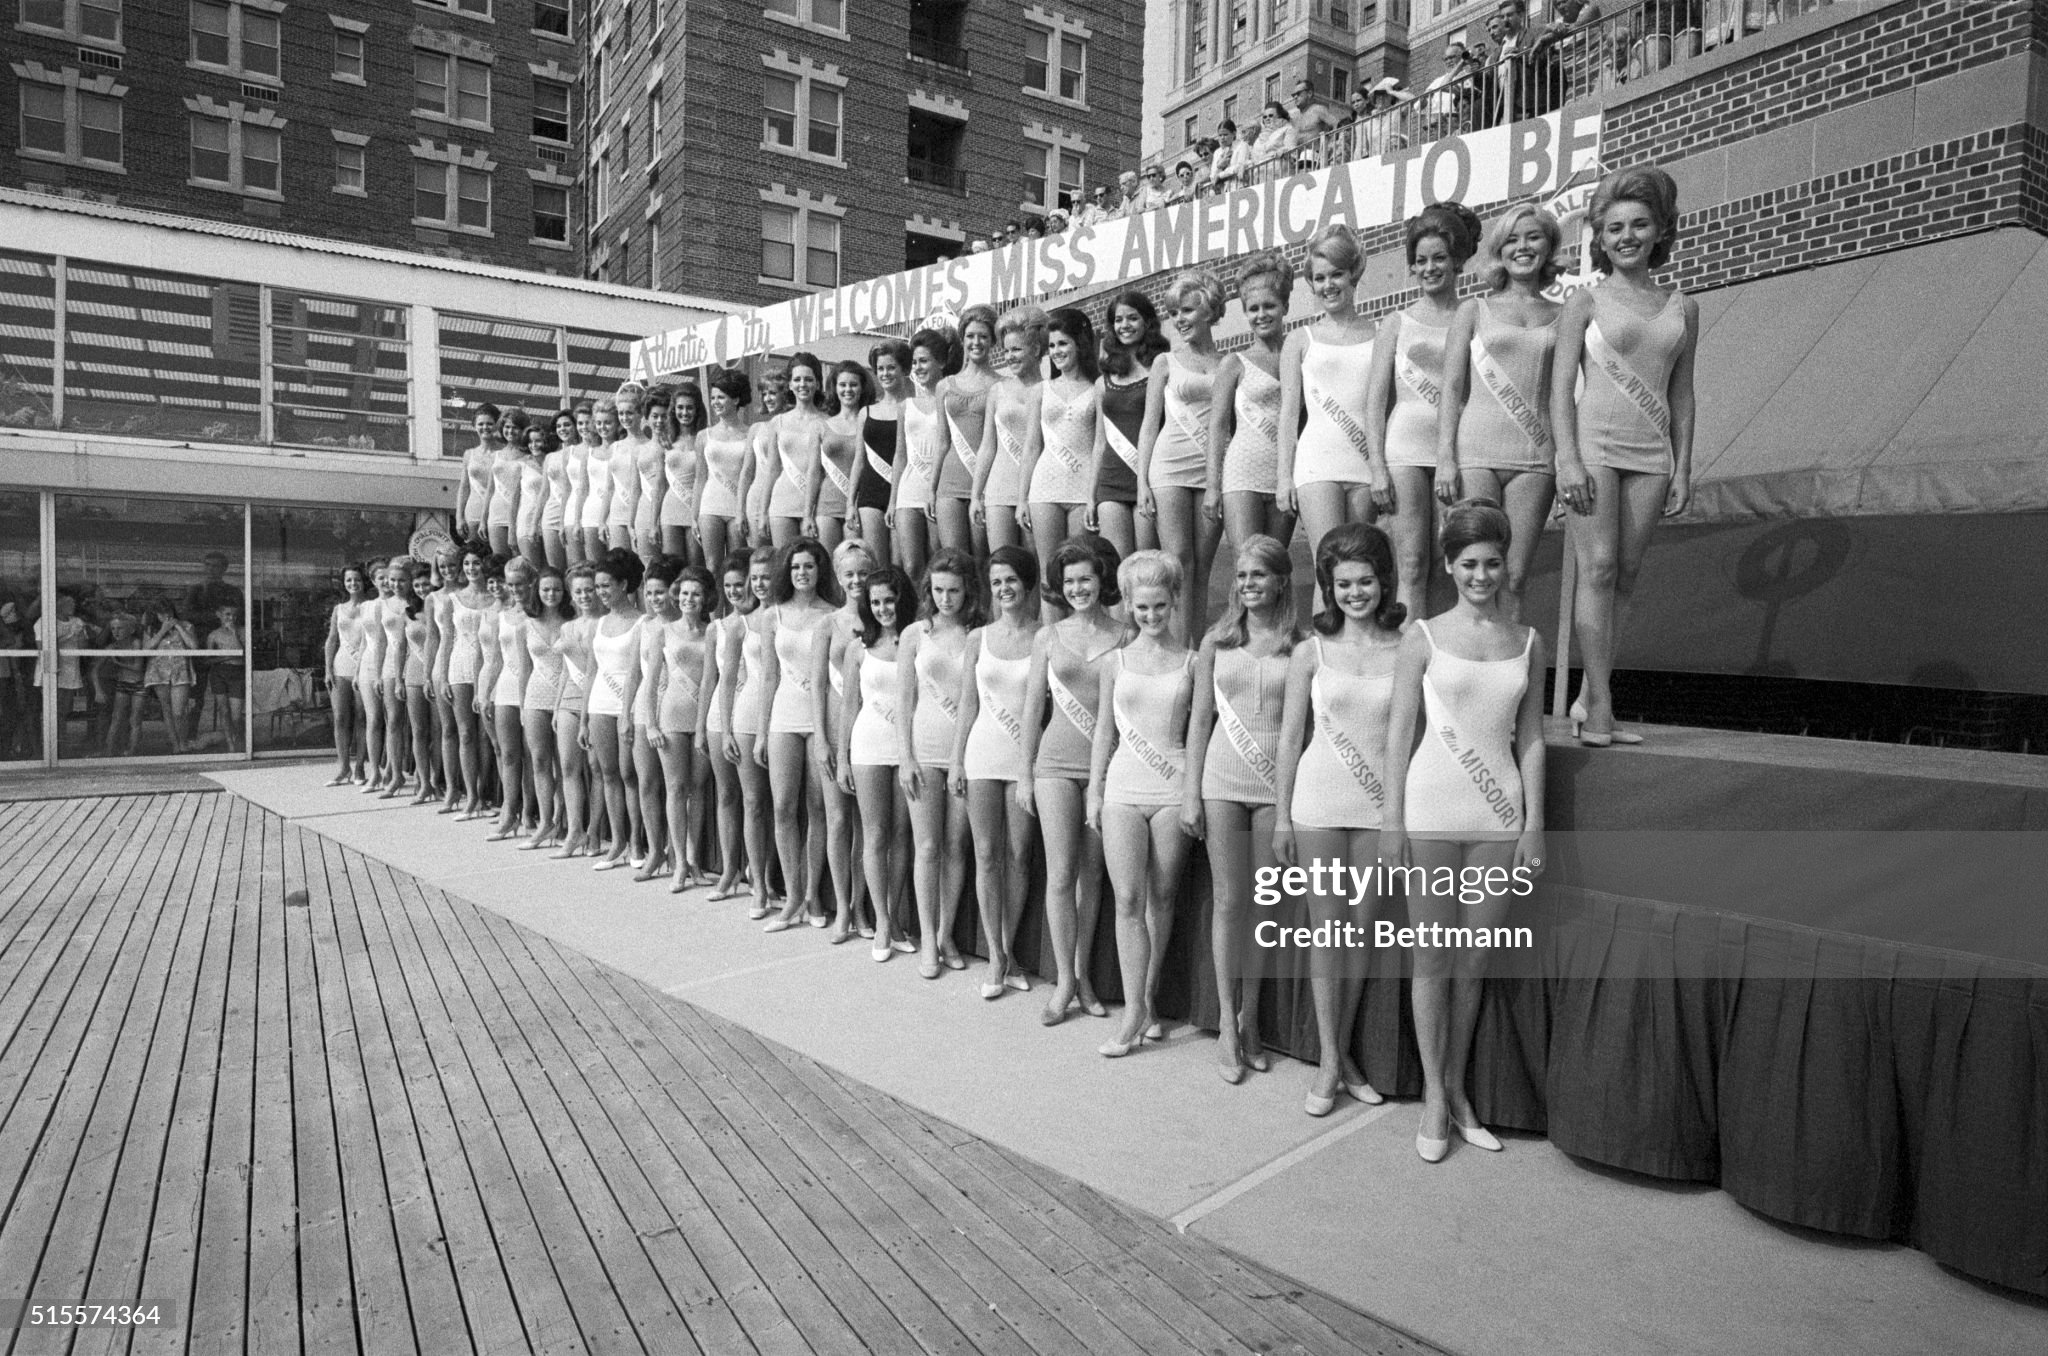 From this bevy of beautiful young girls in their swim suits at Atlantic City, N.J., one will be chosen Miss America 1970 when the annual beauty pageant comes to a close on September 06th 1969. 